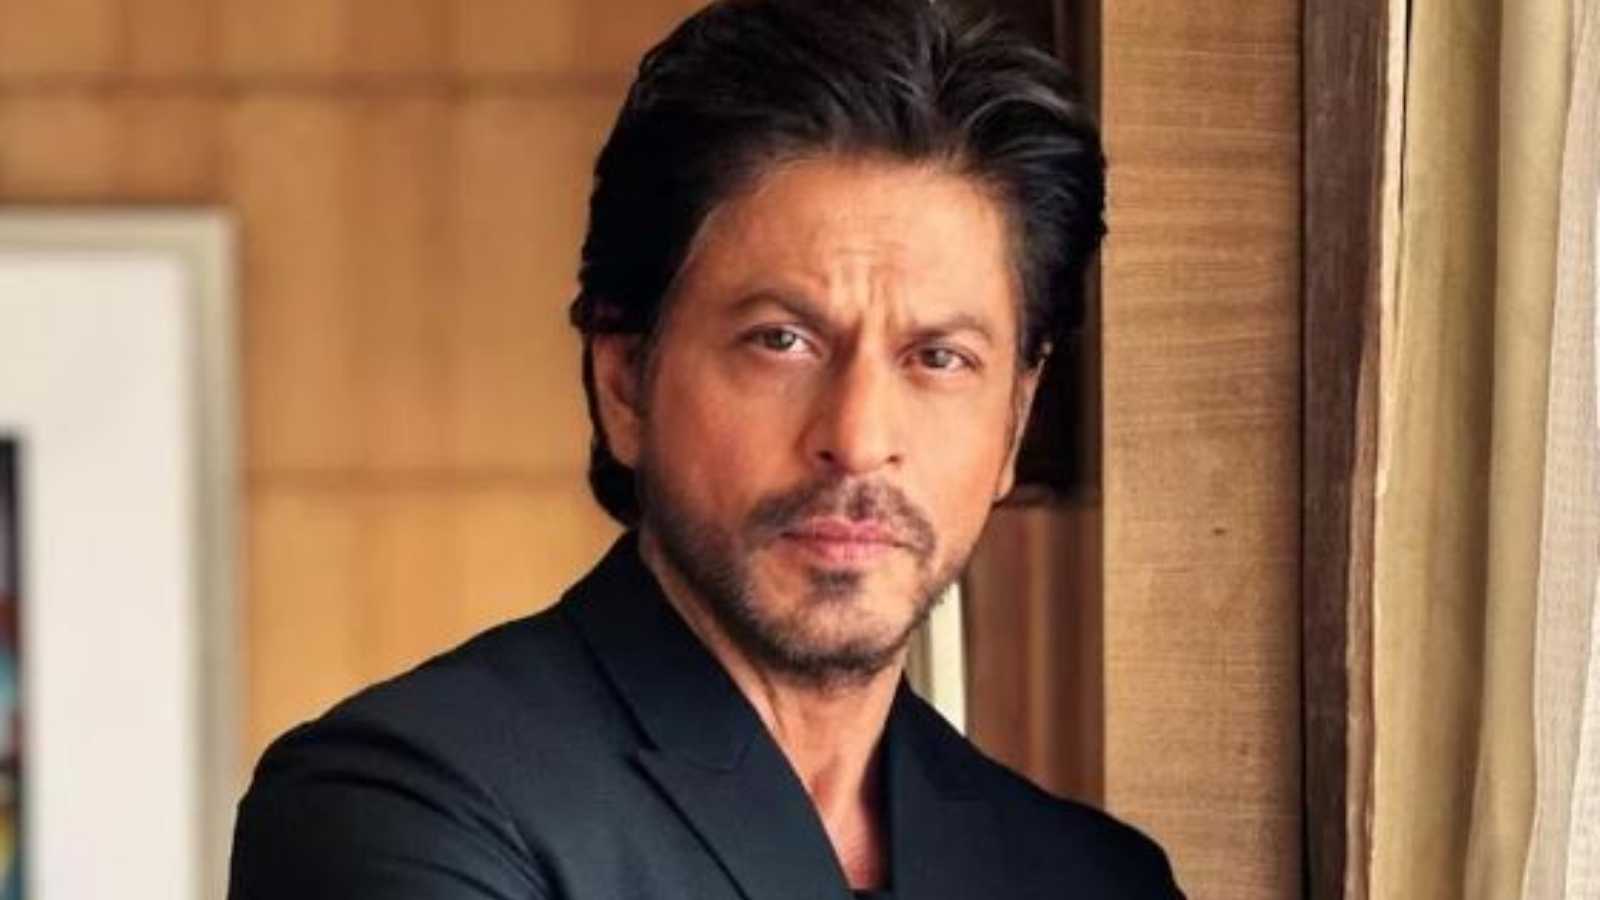 Shah Rukh Khan has a witty reply to Dunki budget rumours, reveals why he didn't wish Salman Khan on social media